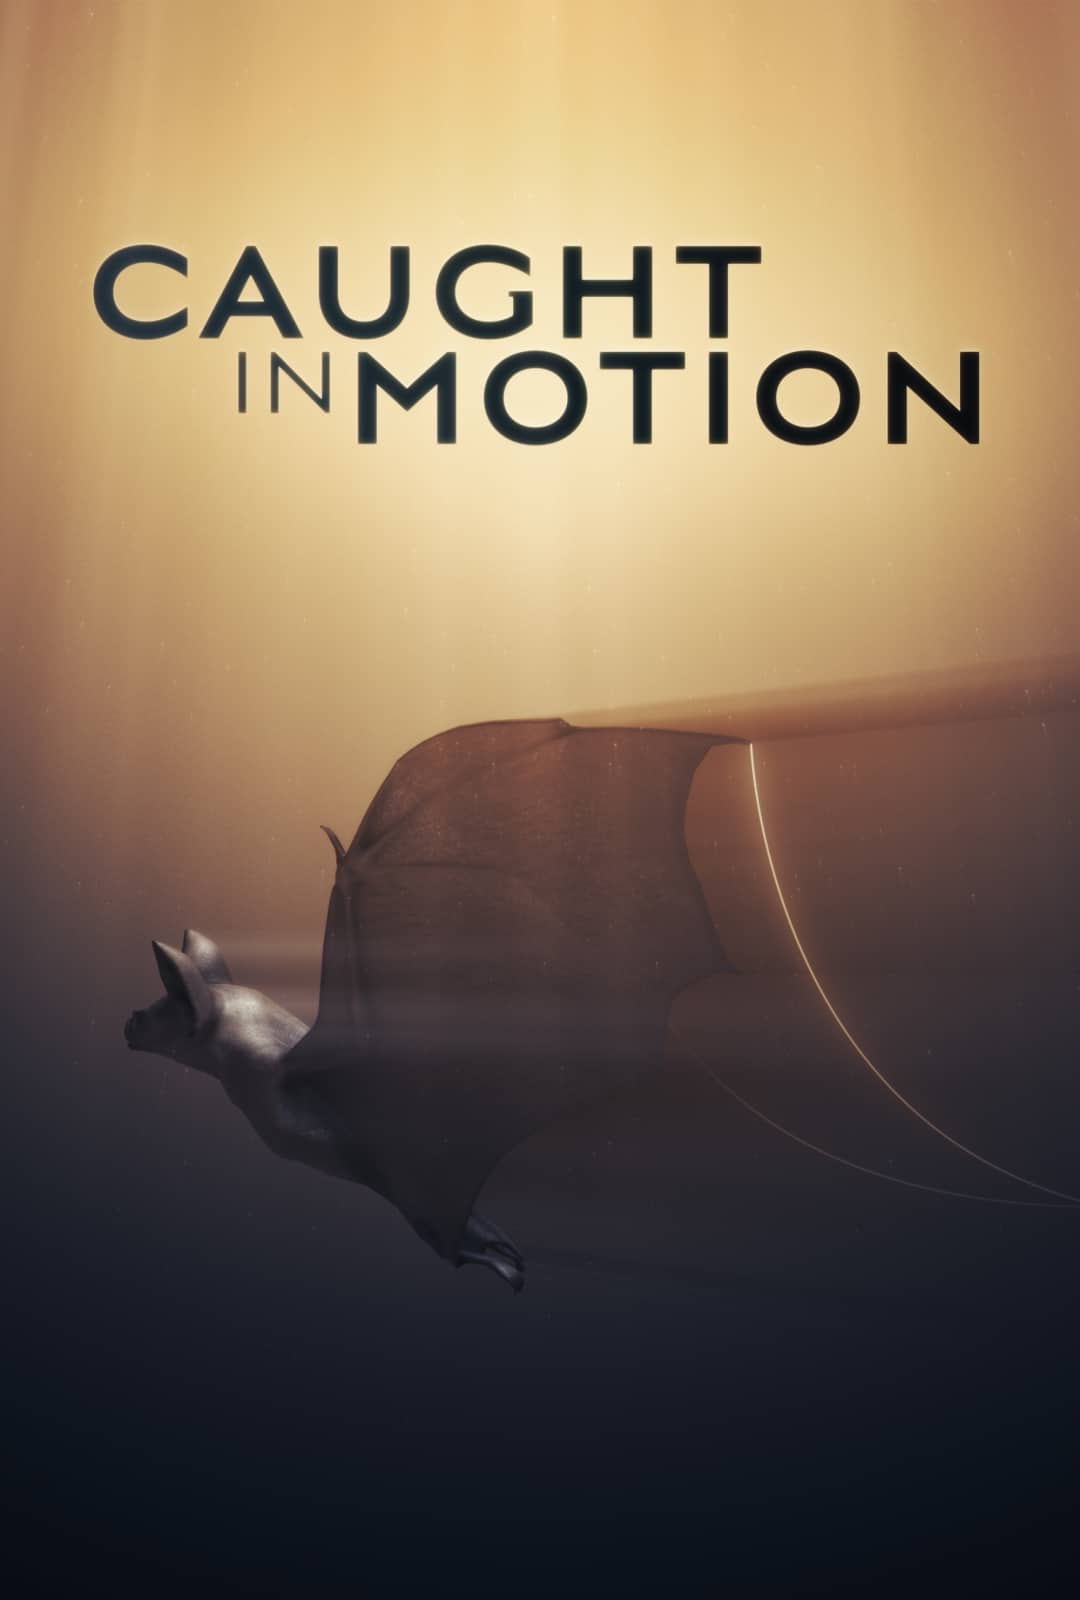 Poster for Caught in Motion. Foley: Infidel Studios.